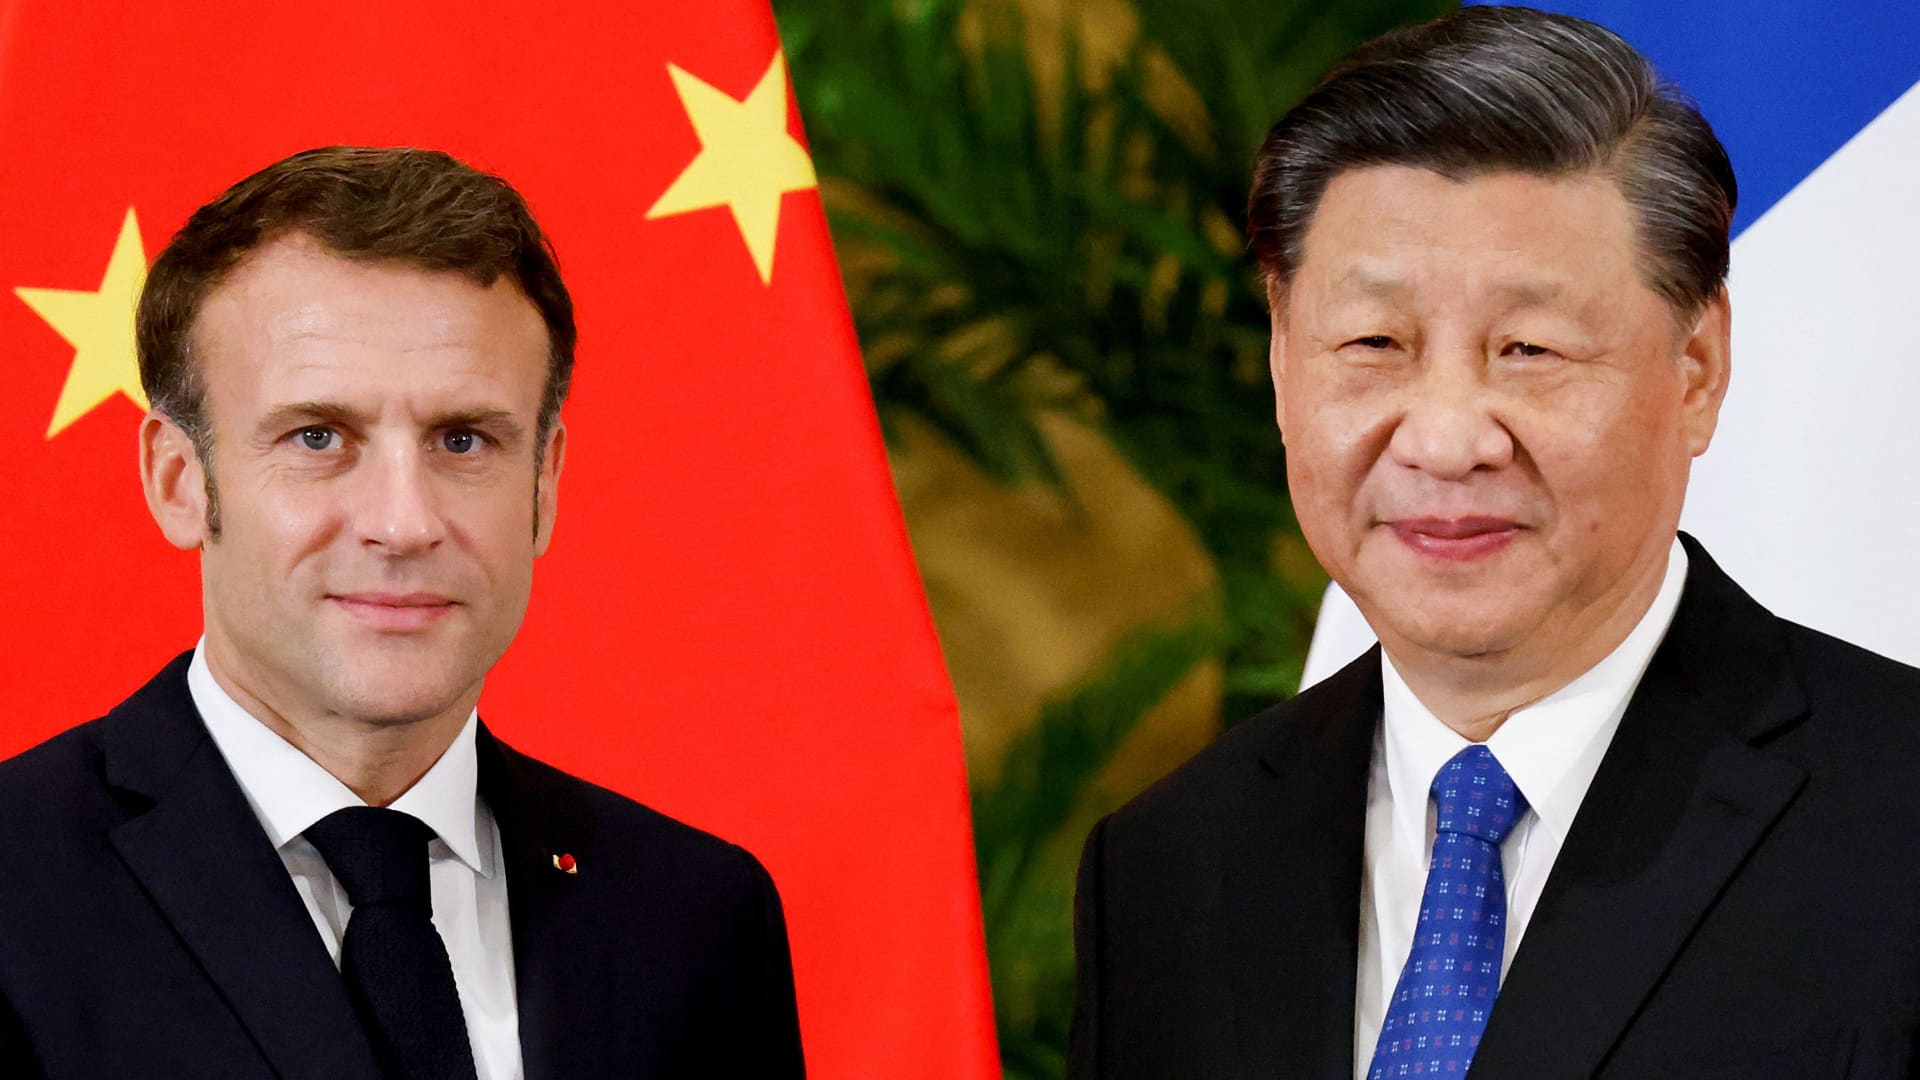 French President Emmanuel Macron (L) meets with Chinese President Xi Jinping prior to their meeting in Nusa Dua, on the Indonesian resort island of Bali on November 15, 2022 on the sidelines of the G20 Summit.